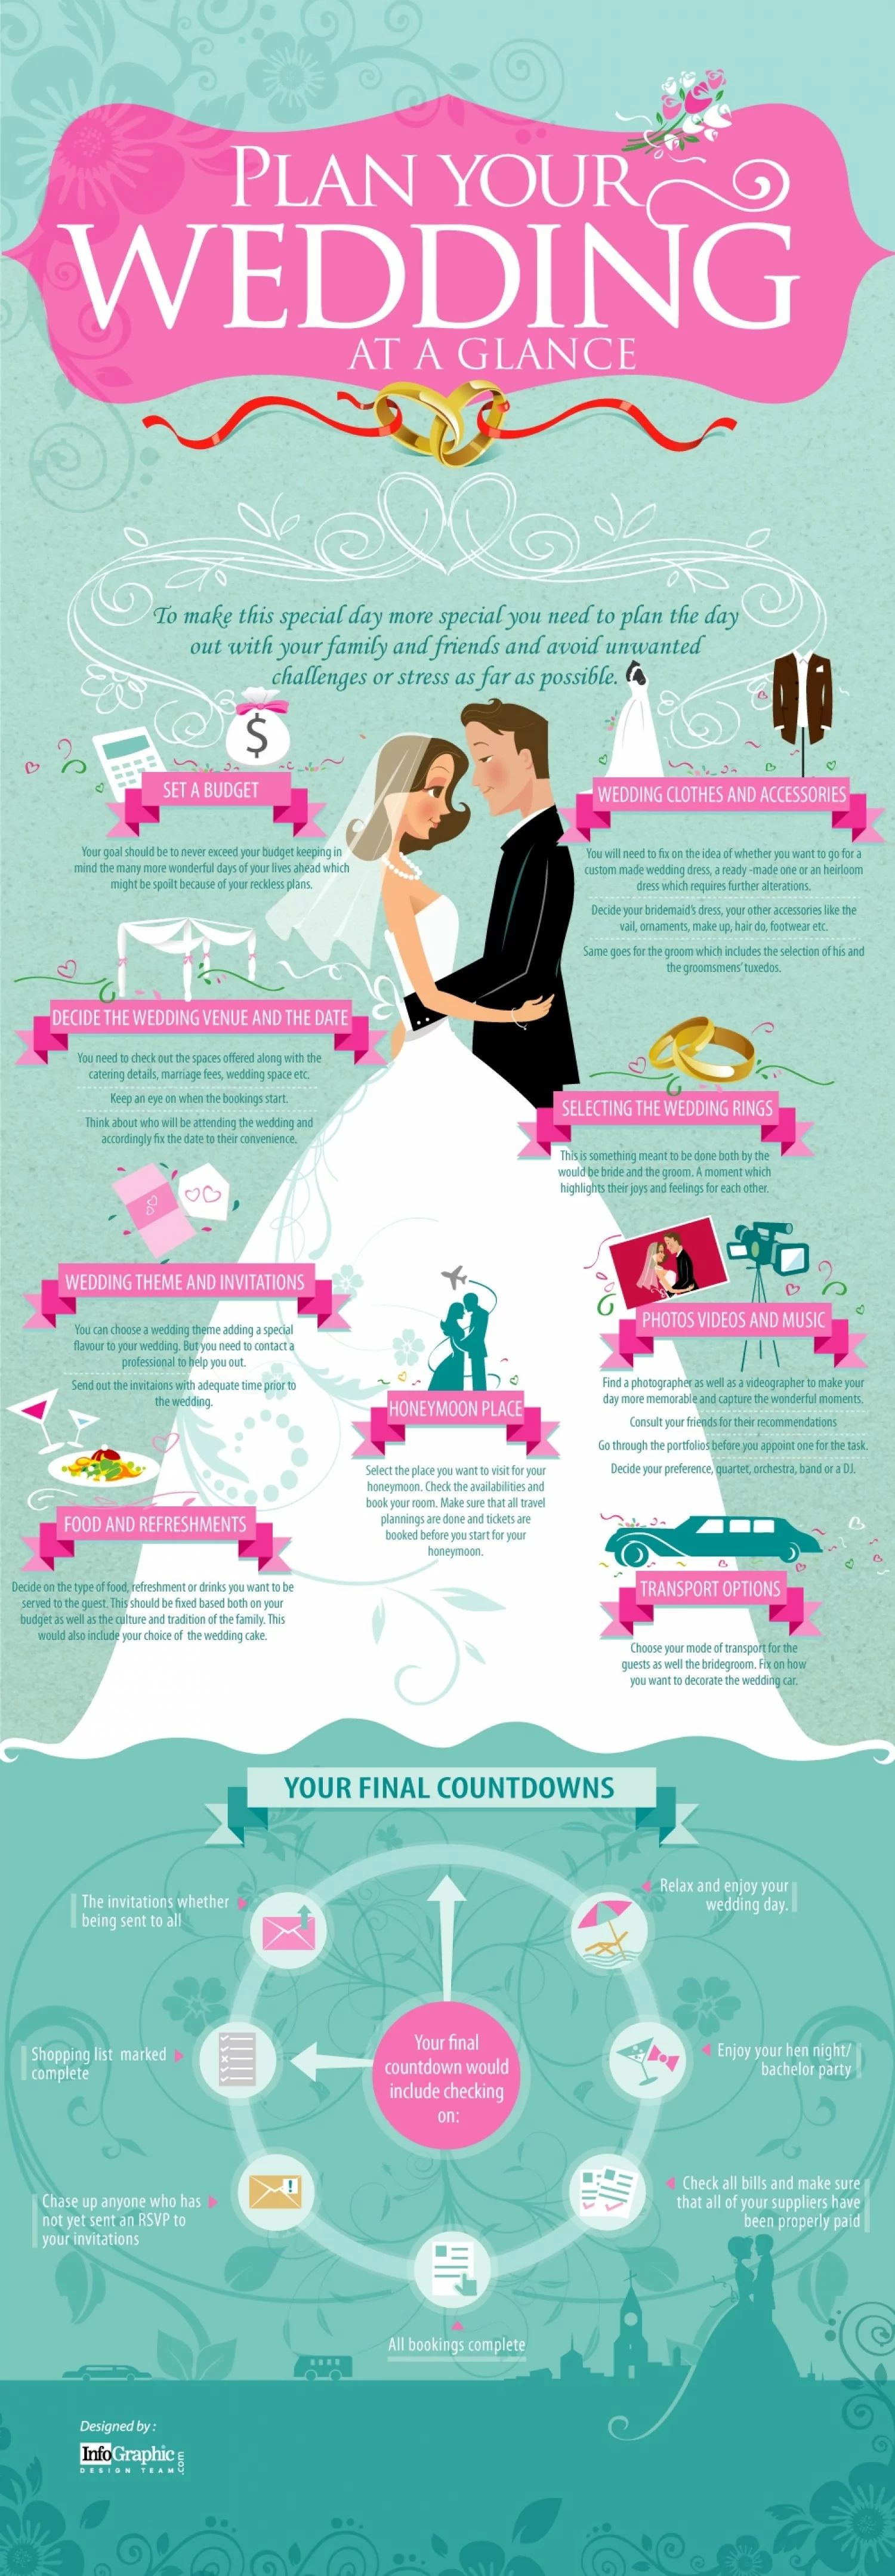 Plan Your Wedding At A Glance